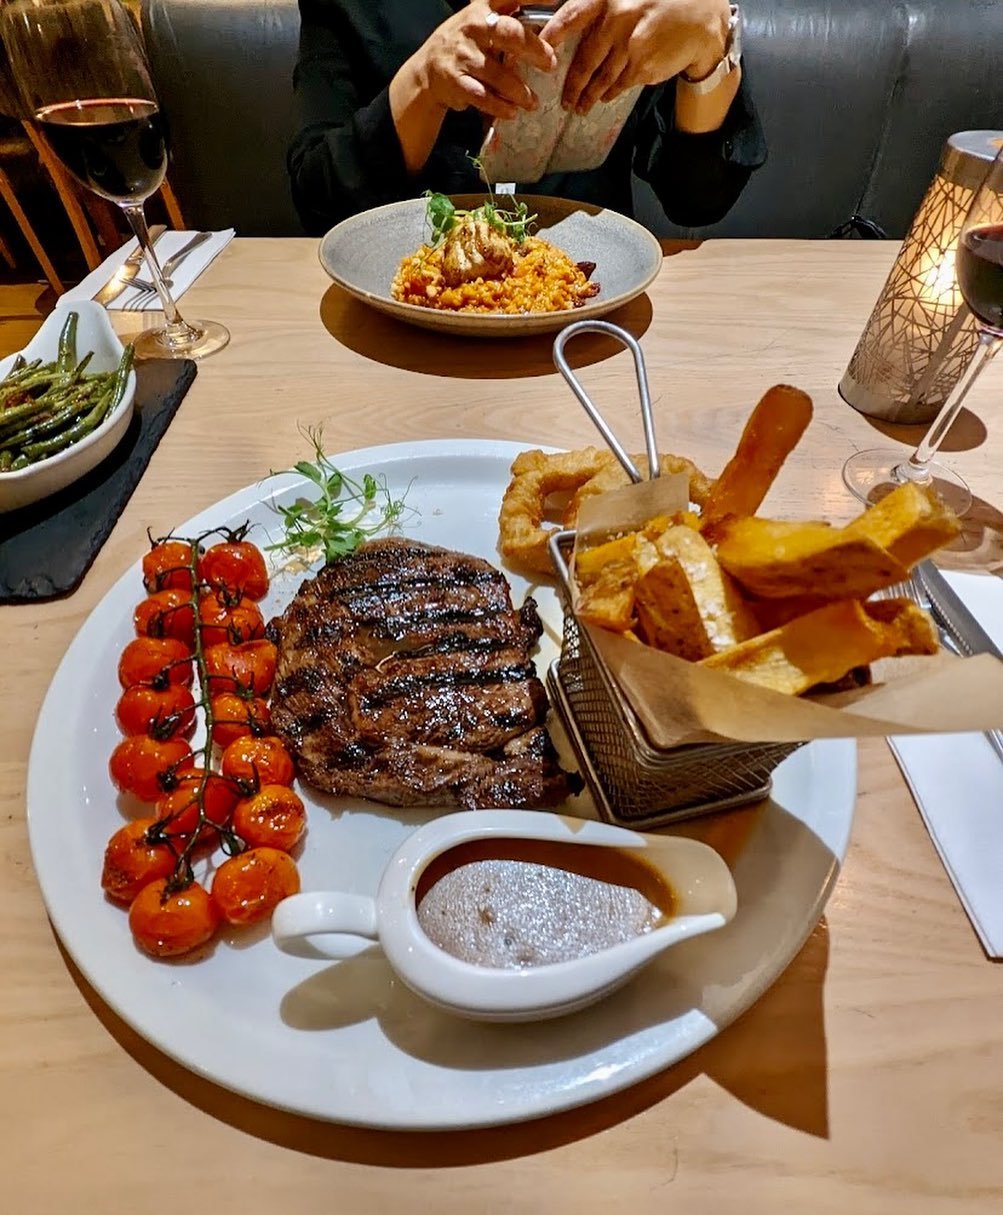 Have you tried our 10oz Ribeye Steak? It never disappoints 😍 give it a try on your next visit 🥩